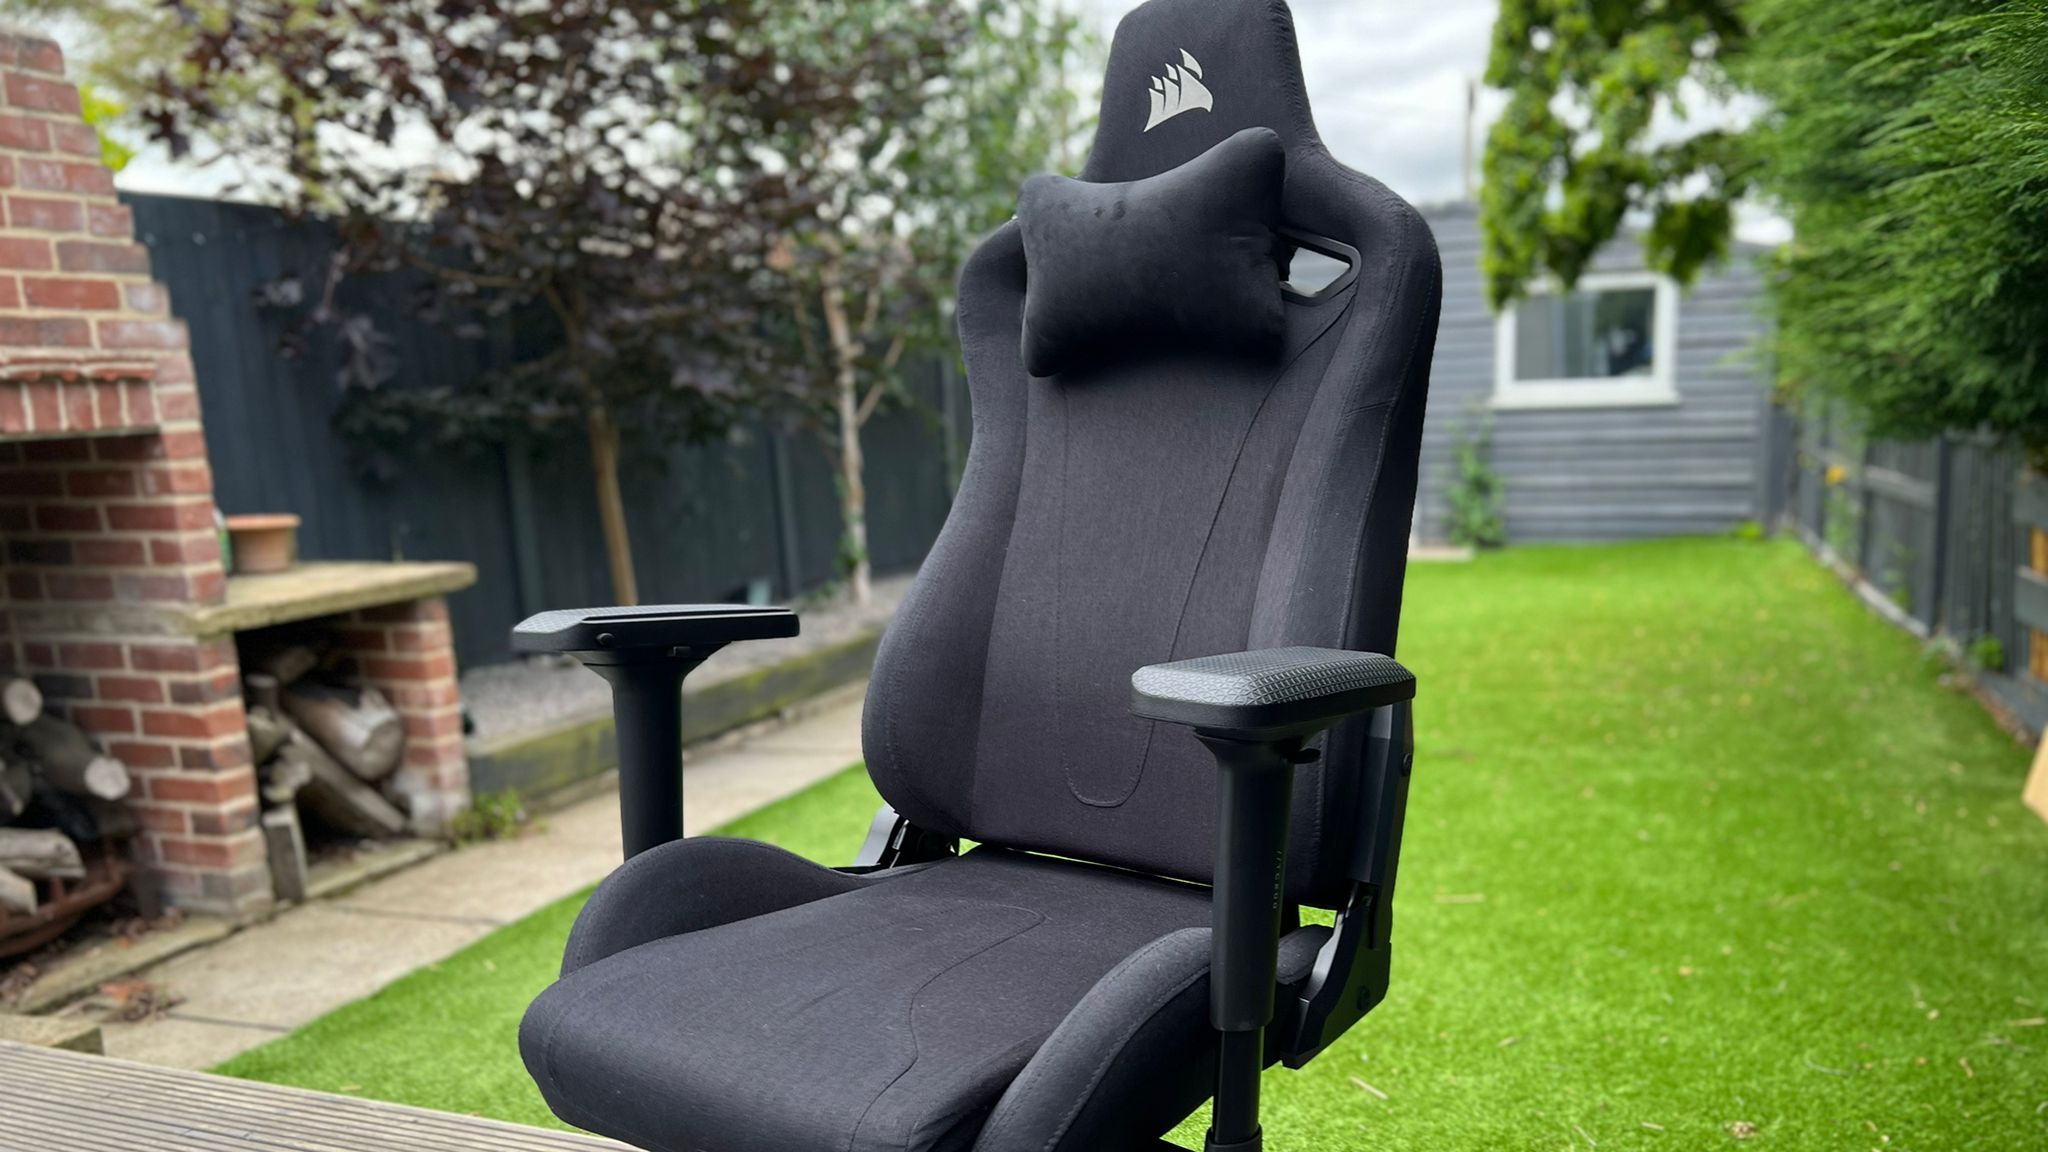 Corsair TC200 gaming chair review: A great chair for both work